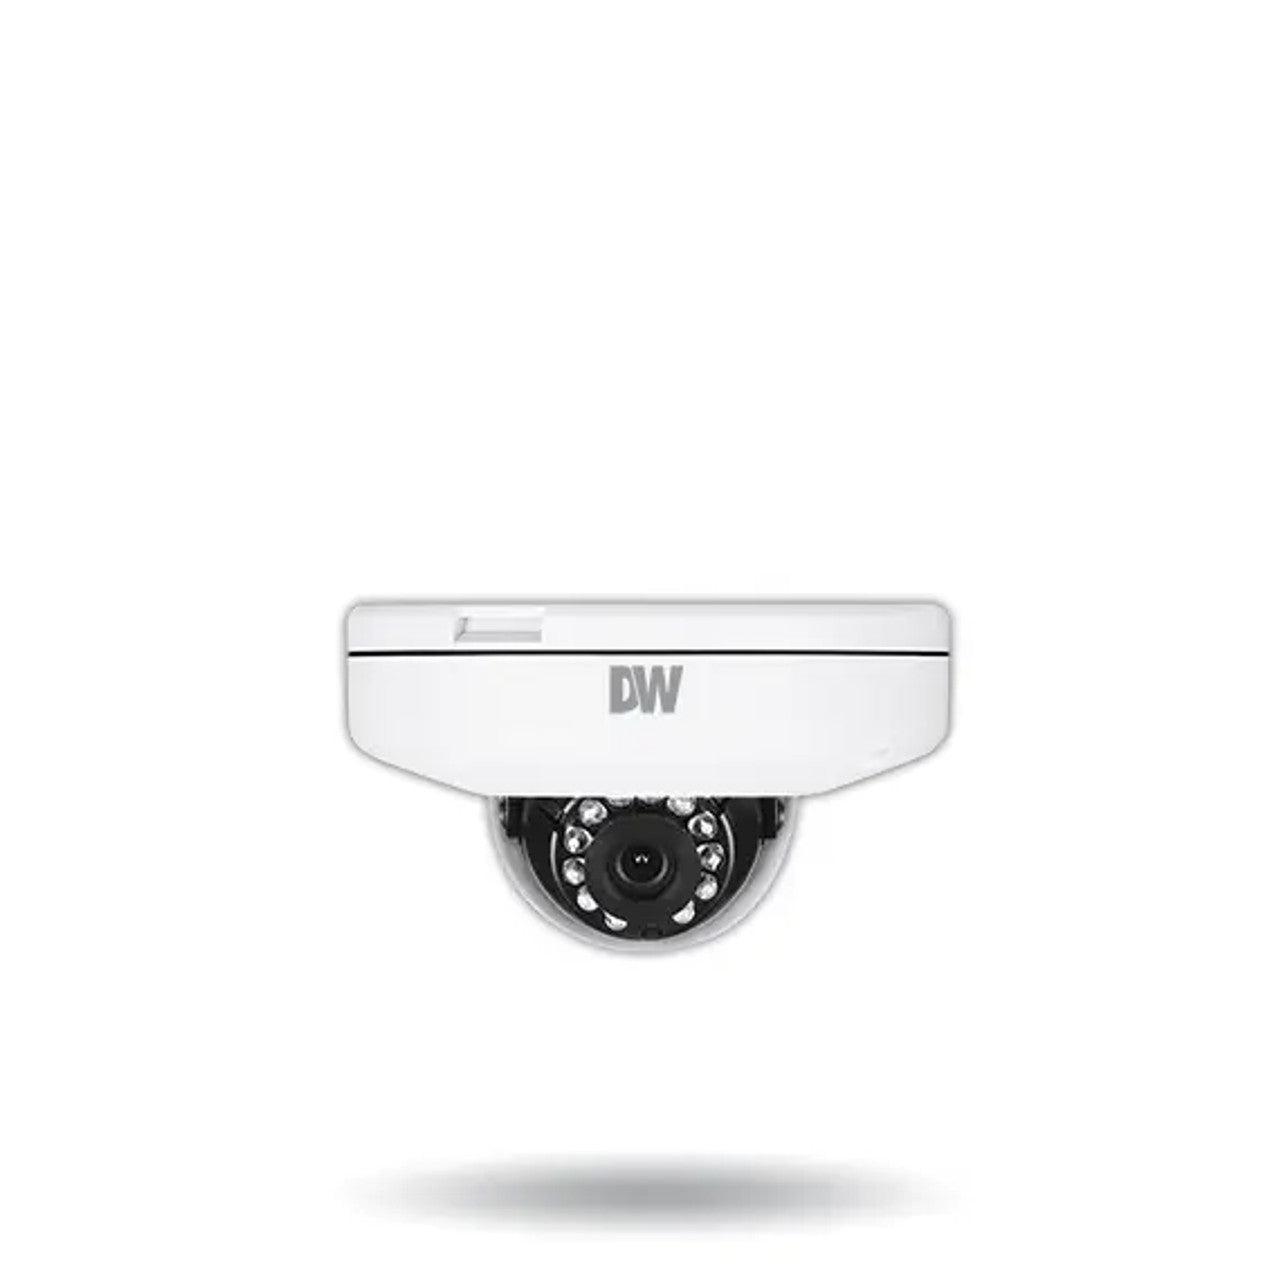 Digital Watchdog DWC-MF4Wi4WC5 4MP Night Vision Outdoor Dome IP Security Camera, CaaS, 512GB Storage, 4.0mm Fixed Lens